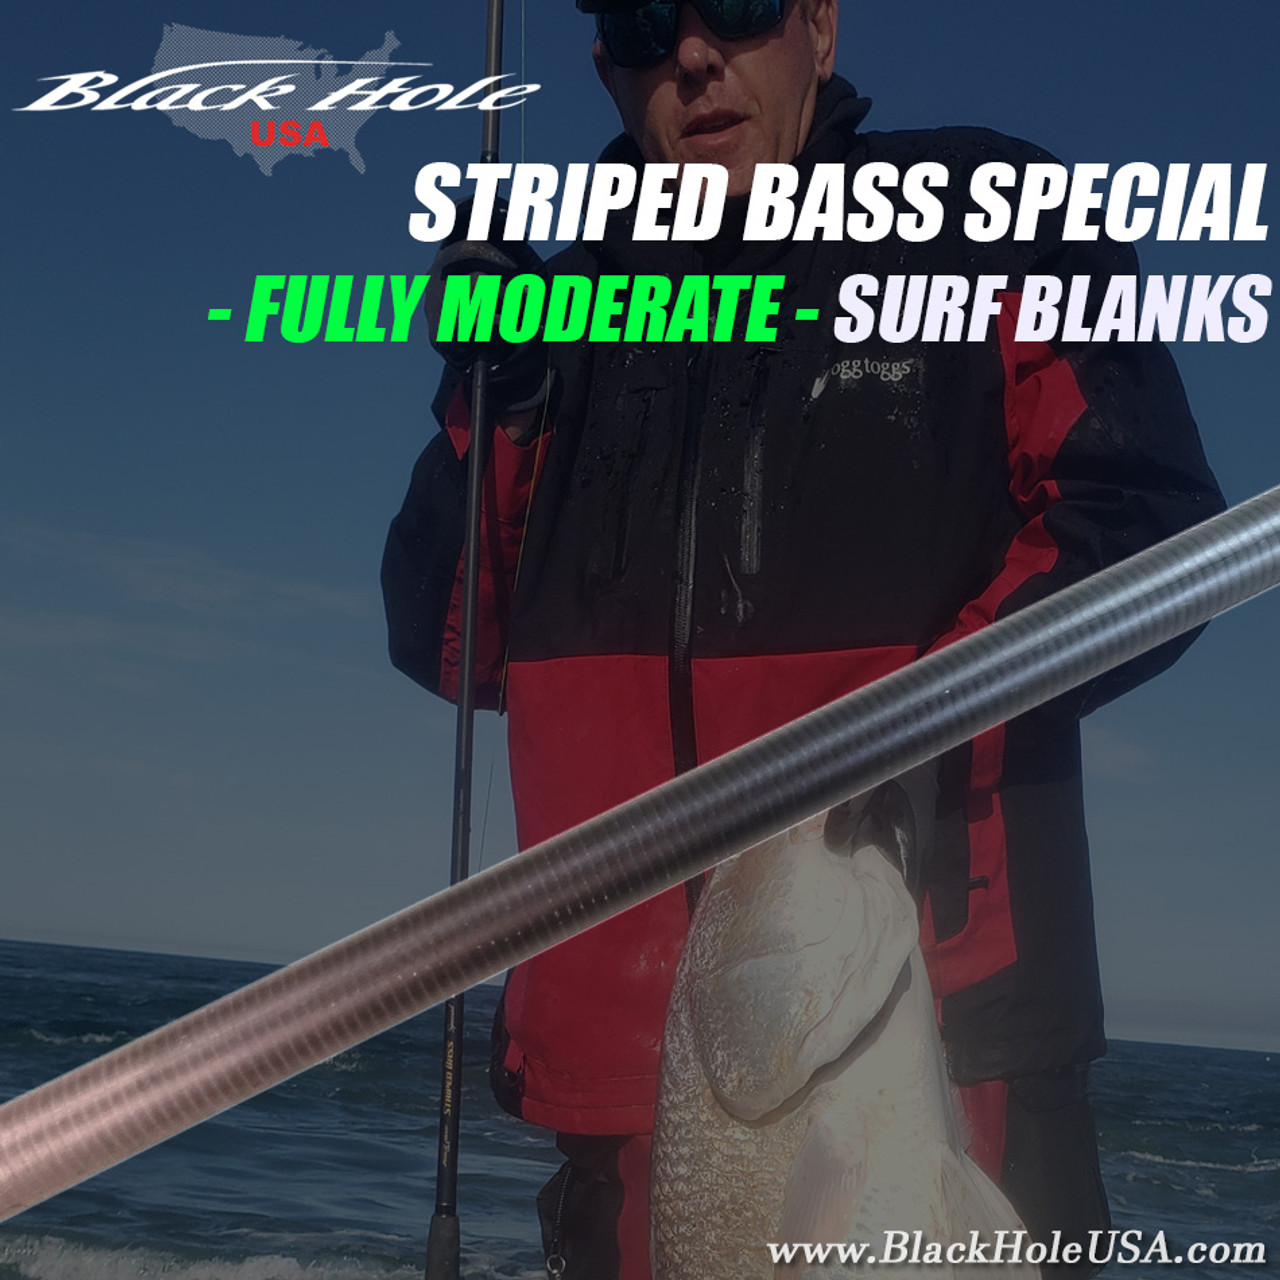 Black Hole USA Striped Bass Special FULLY MODERATE Surf Blanks, Black Hole  USA, Striped Bass